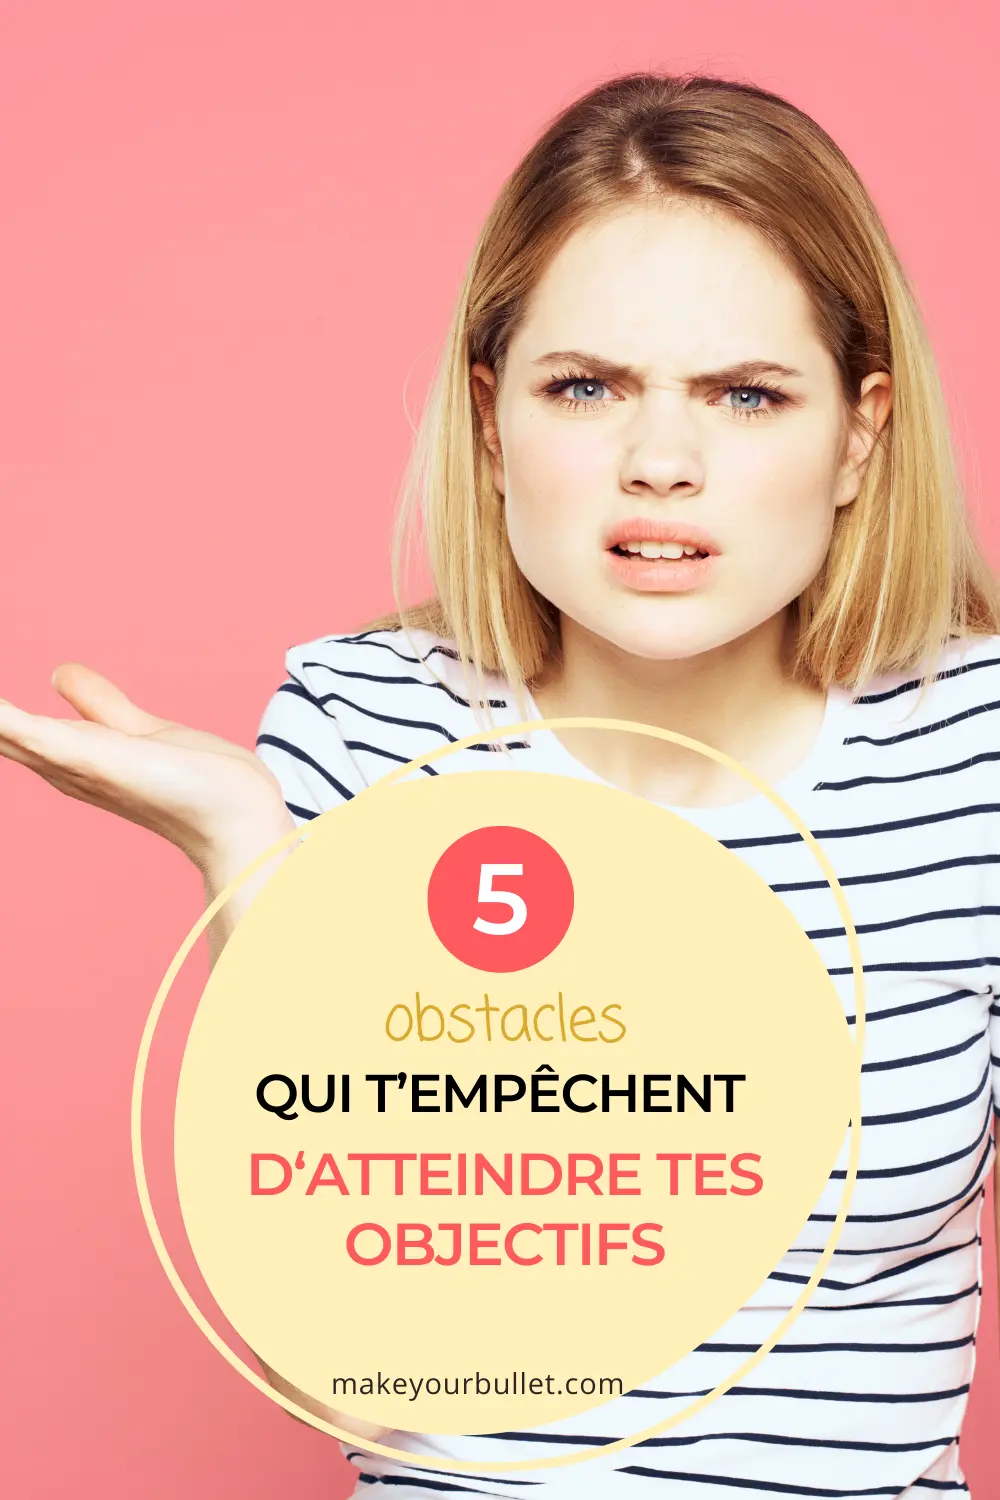 5-obstacles-atteindre-tes-objectifs-et-solutions-blog